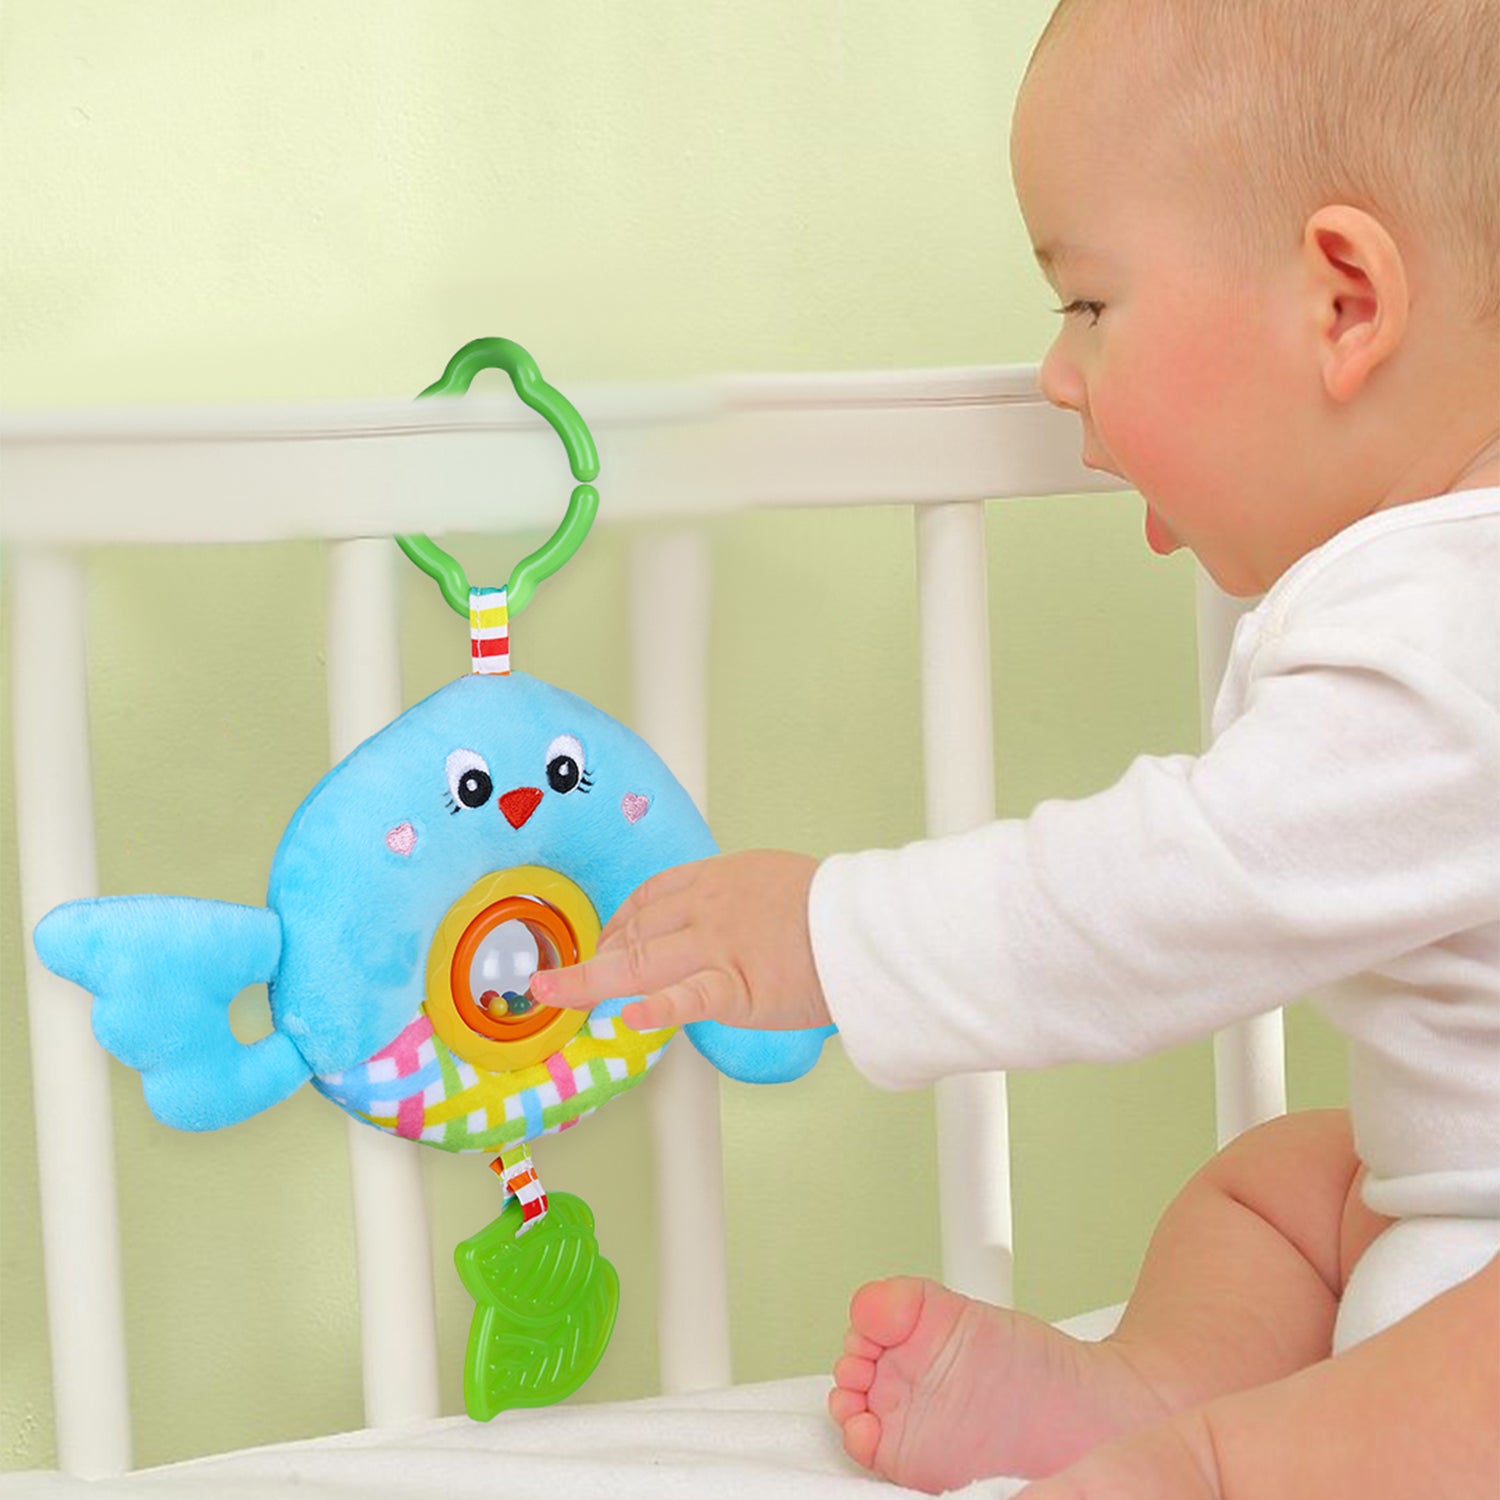 Bird Stroller Crib Hanging Plush Rattle Toy With Teether - Blue - Baby Moo